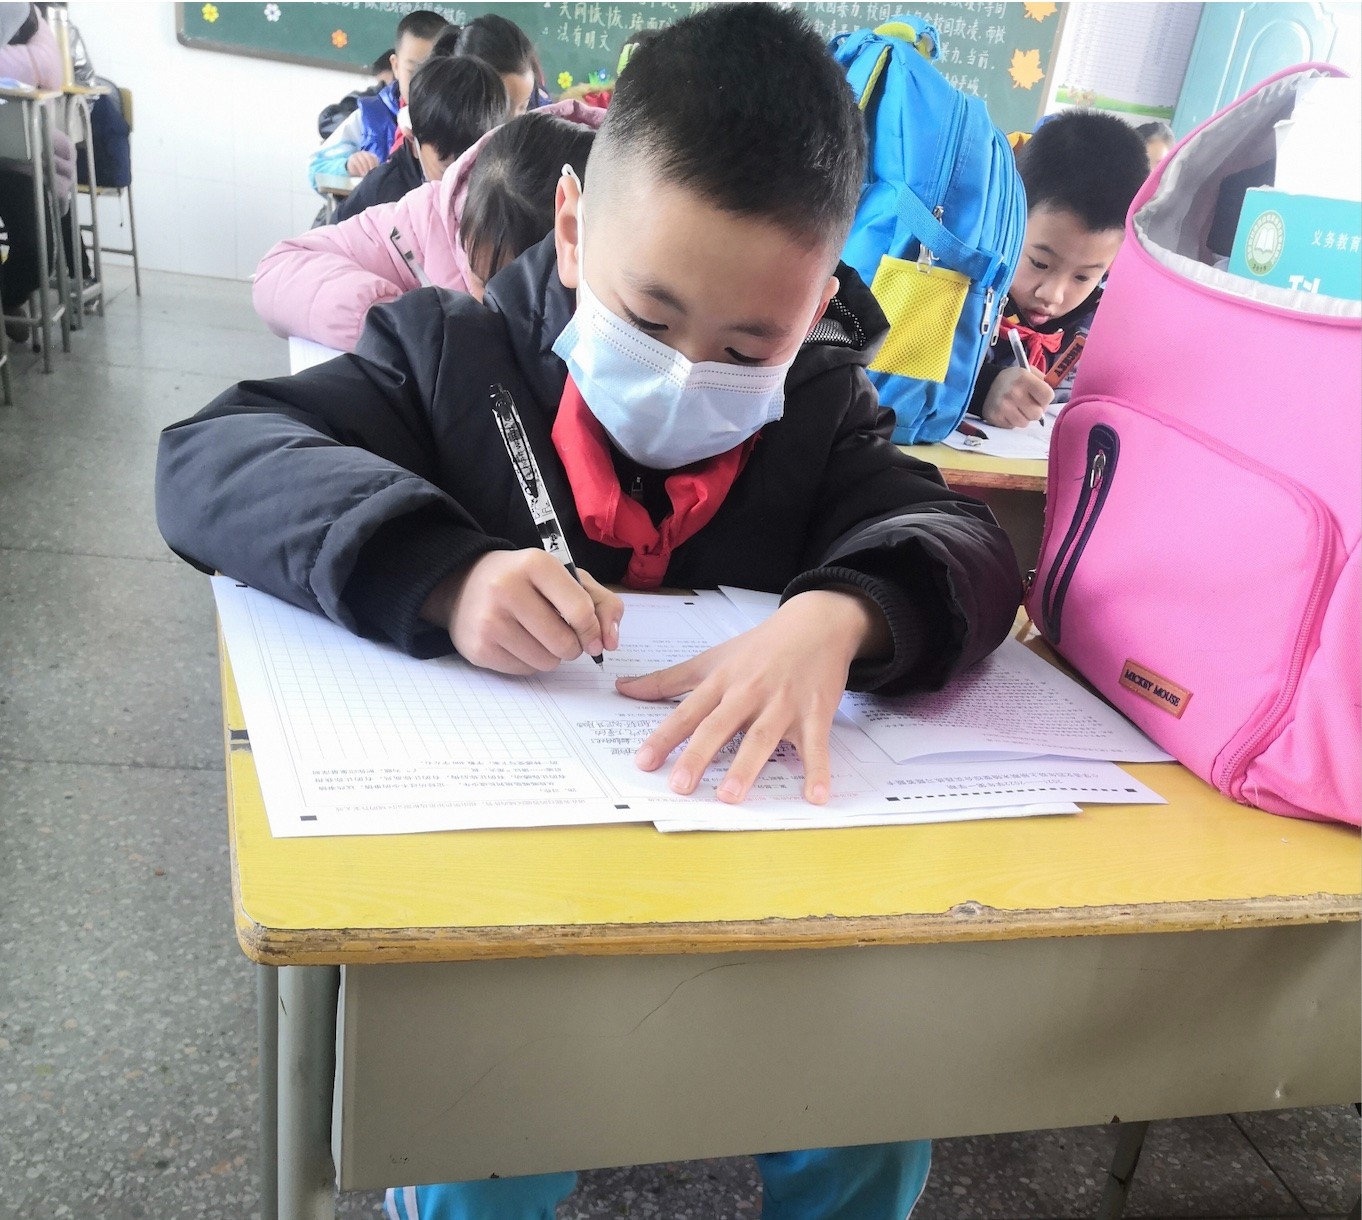 China Clamps Down On Winter Holiday Private Tutoring